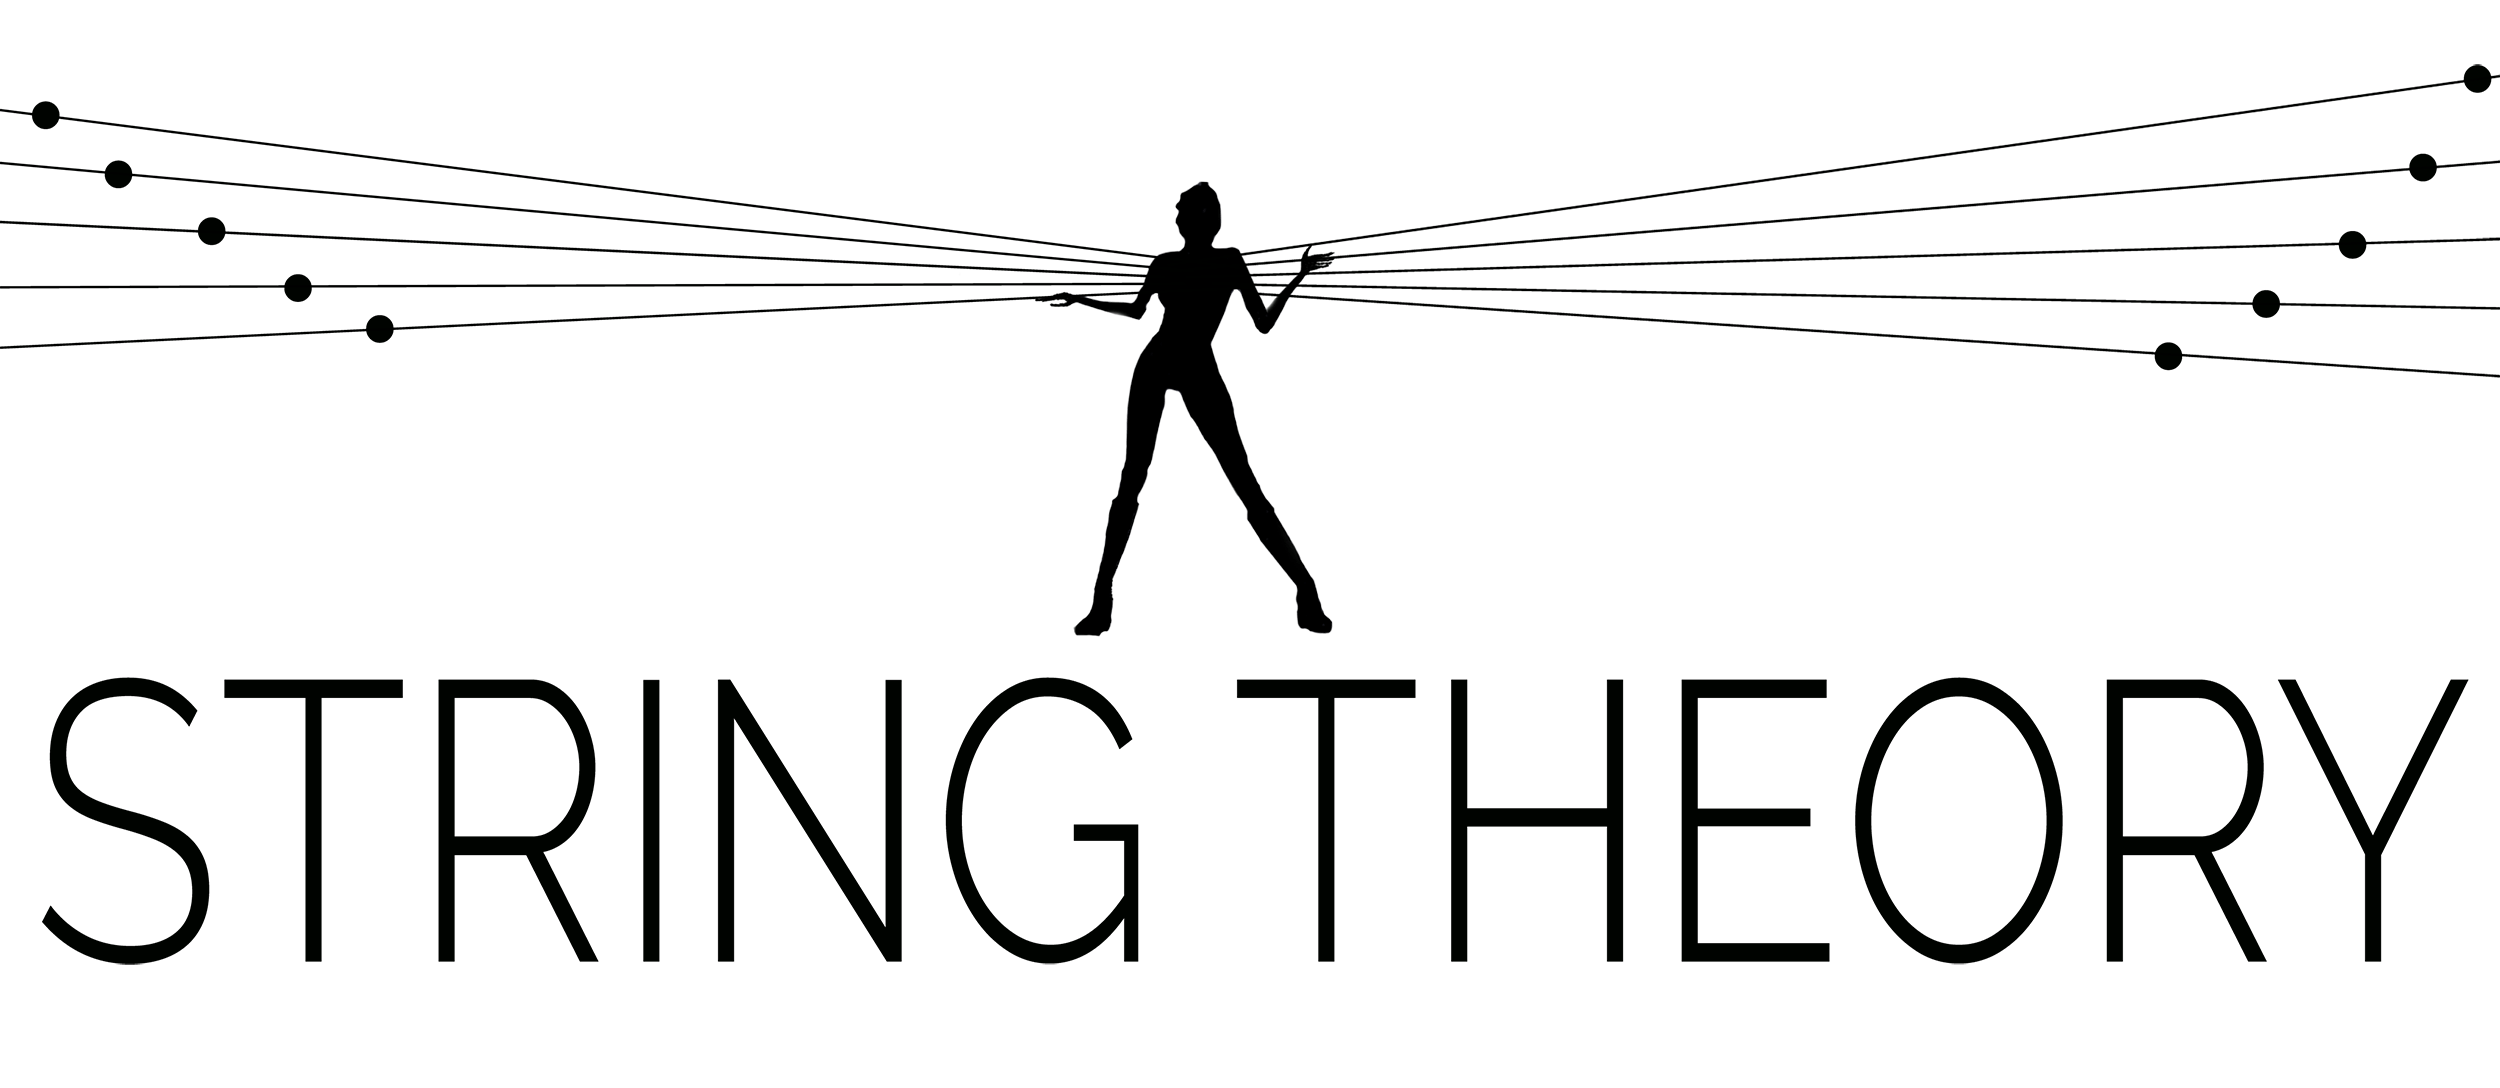 String Logo - Los Angeles Times. Press Theory Productions